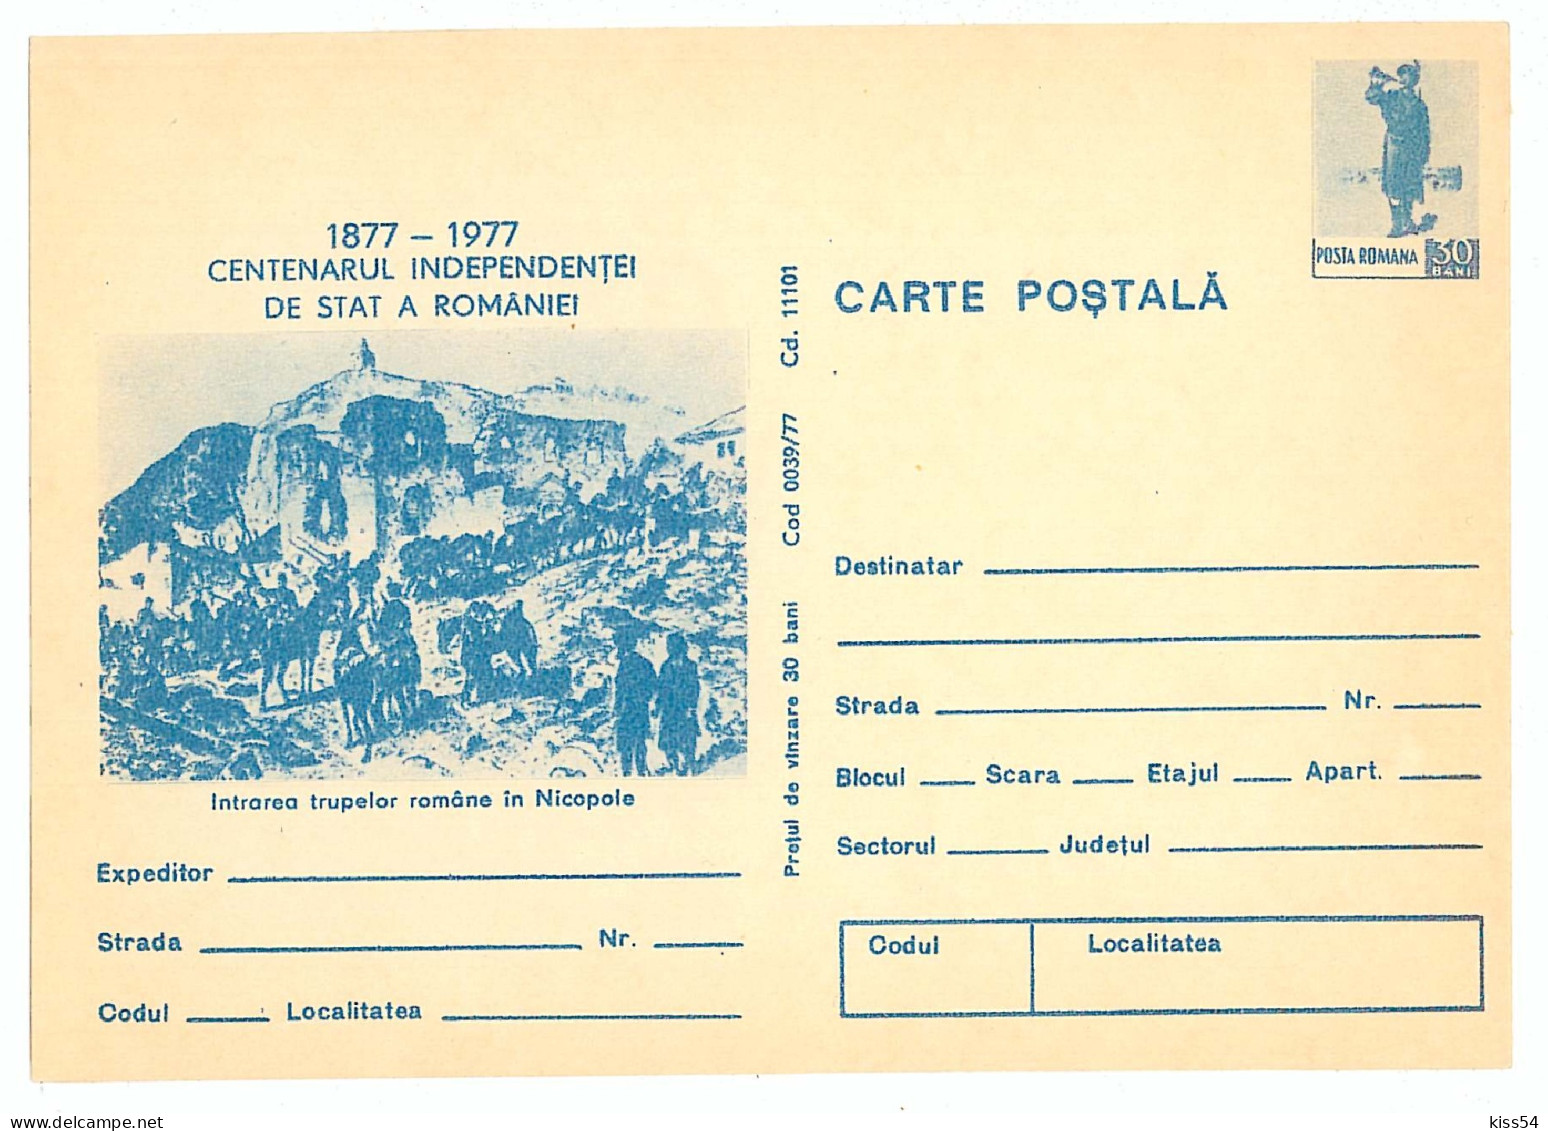 IP 77 A - 39 Centenary Independence Of Romania - Stationery - Unused - 1977 - Ganzsachen